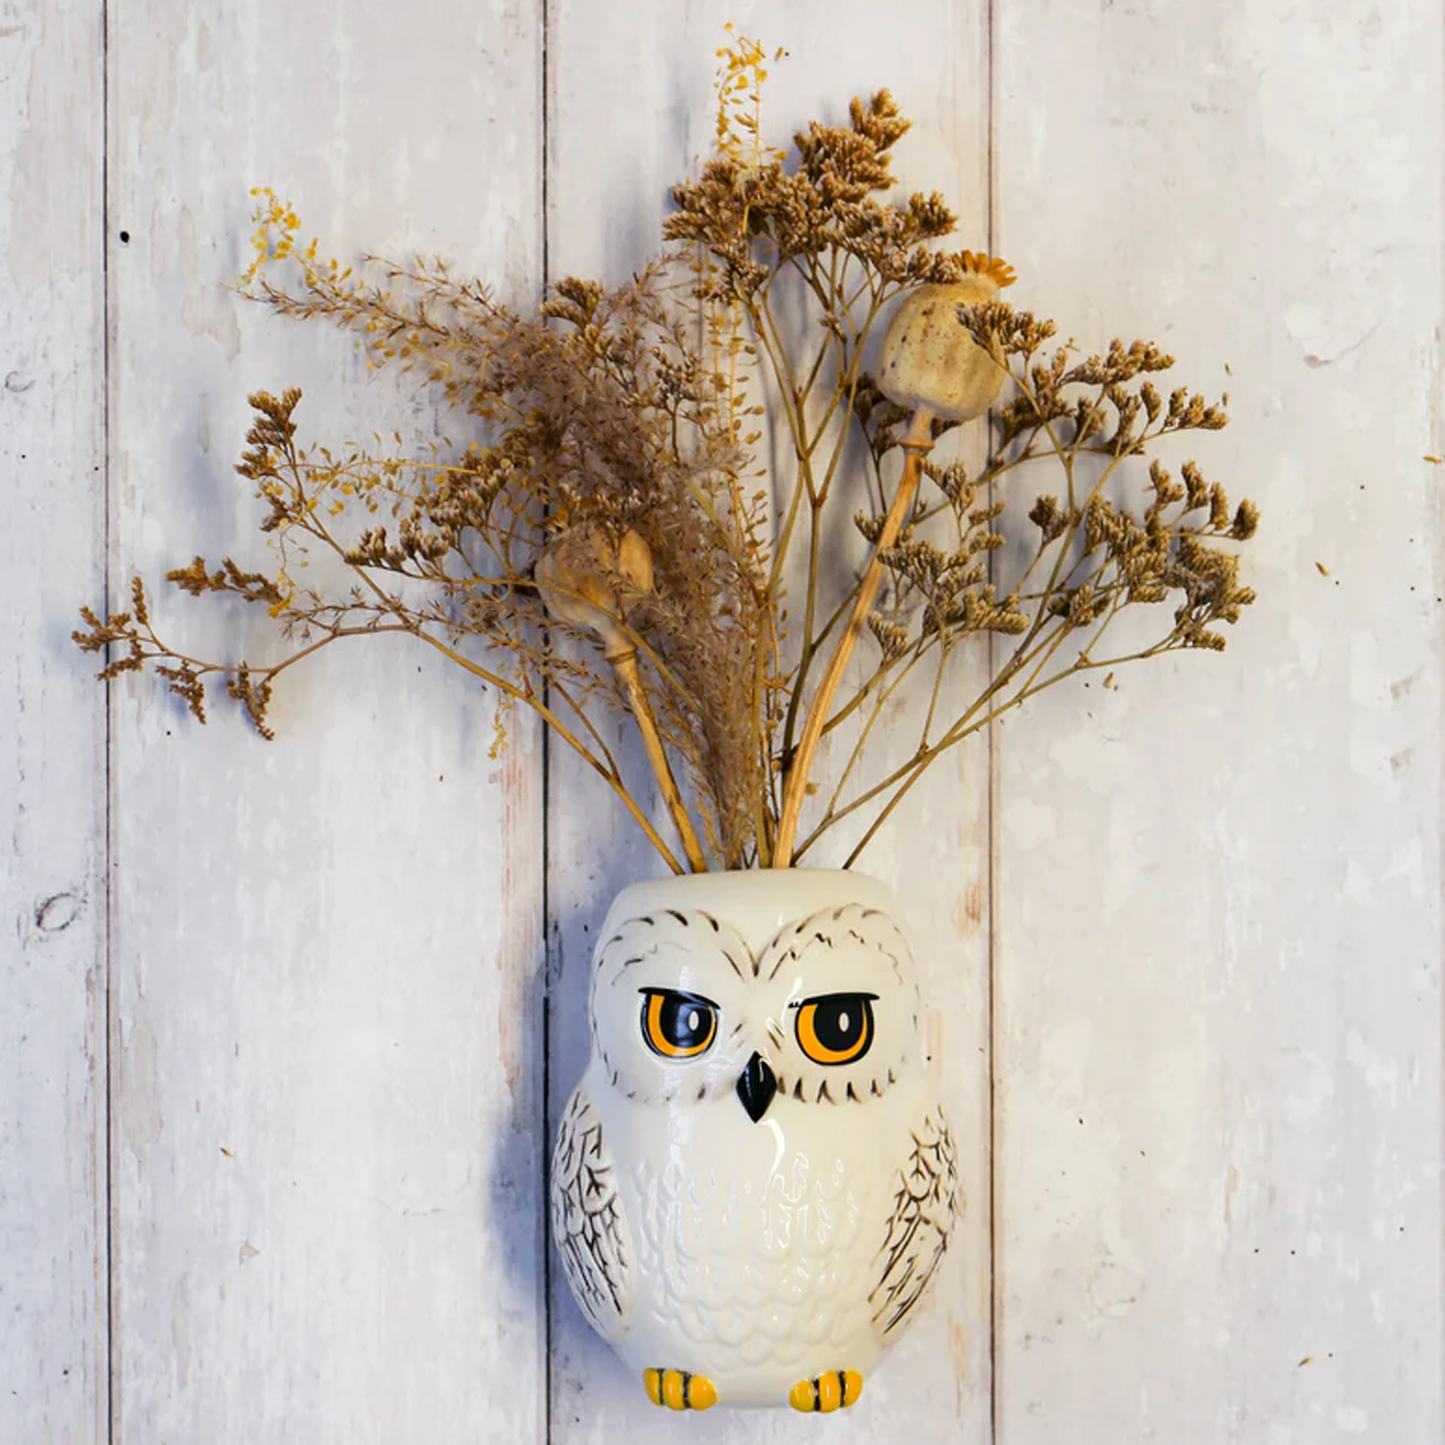 Harry Potter Hedwig the Owl Wall Vase / Storage Pot on a Wall | Happy Piranha